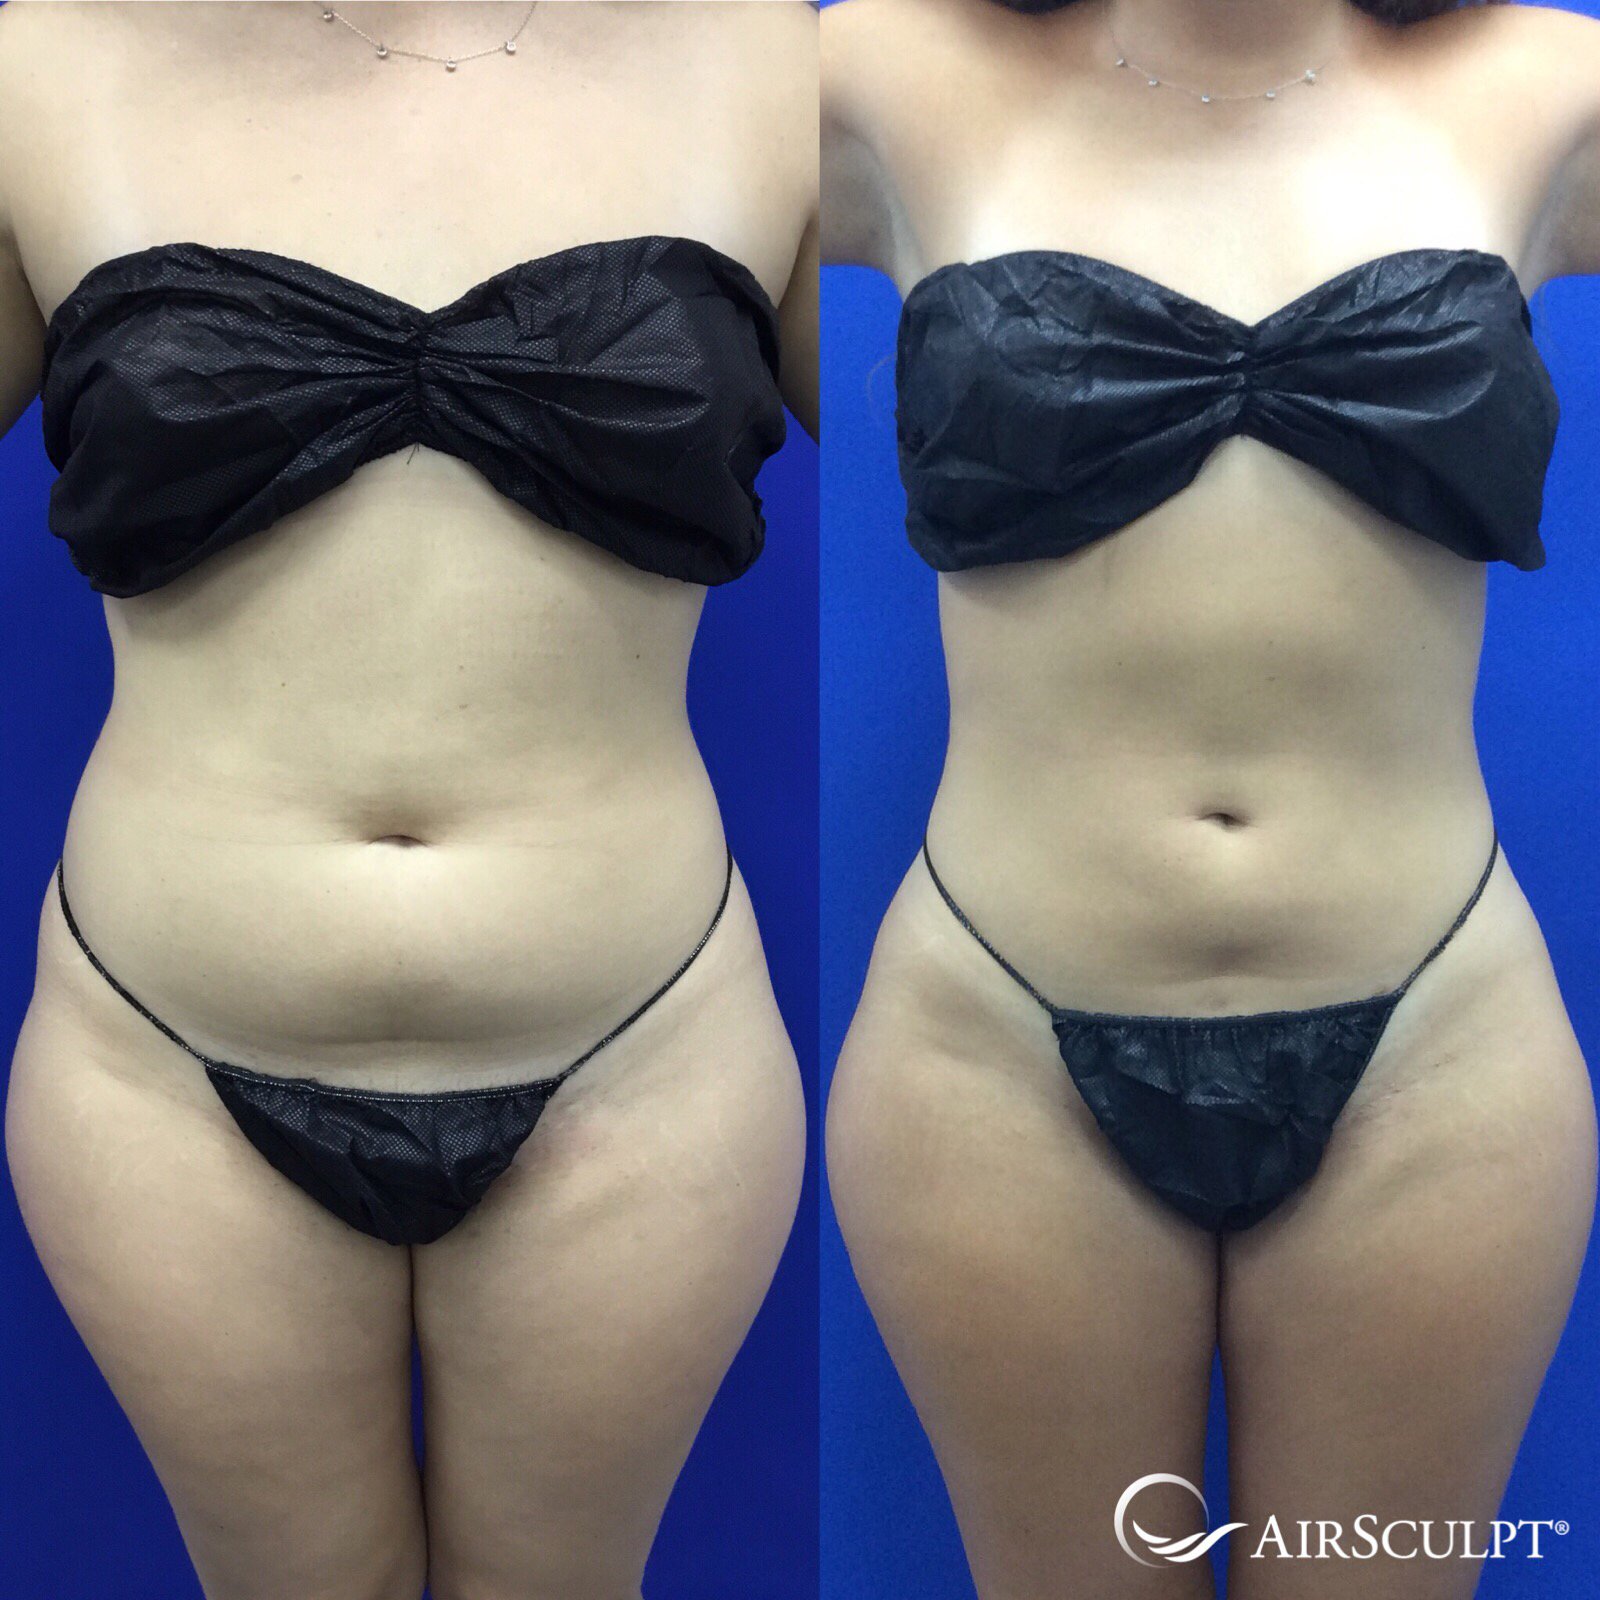 AirSculpt on X: 👀 Can you believe it?! This patient went down